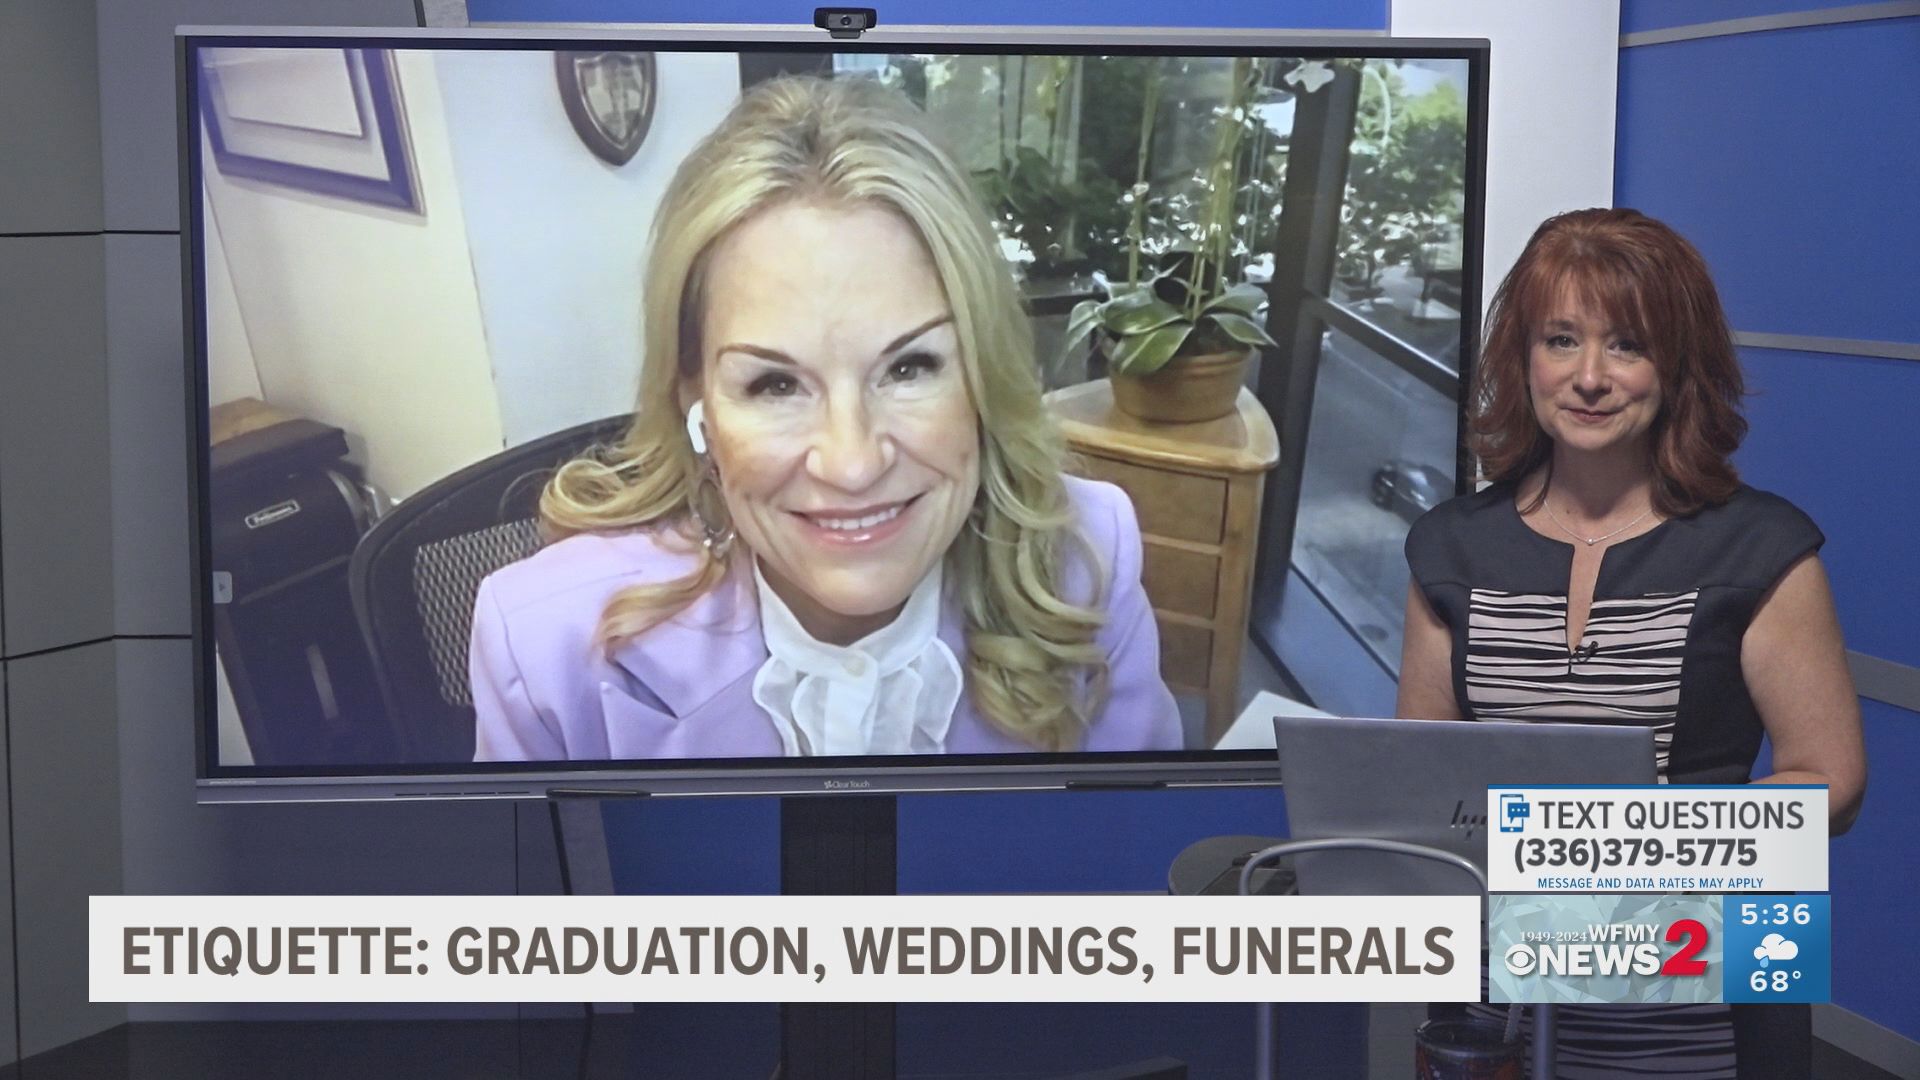 Culture and Etiquette Expert shares how to approach condolence gifts and funeral attire.